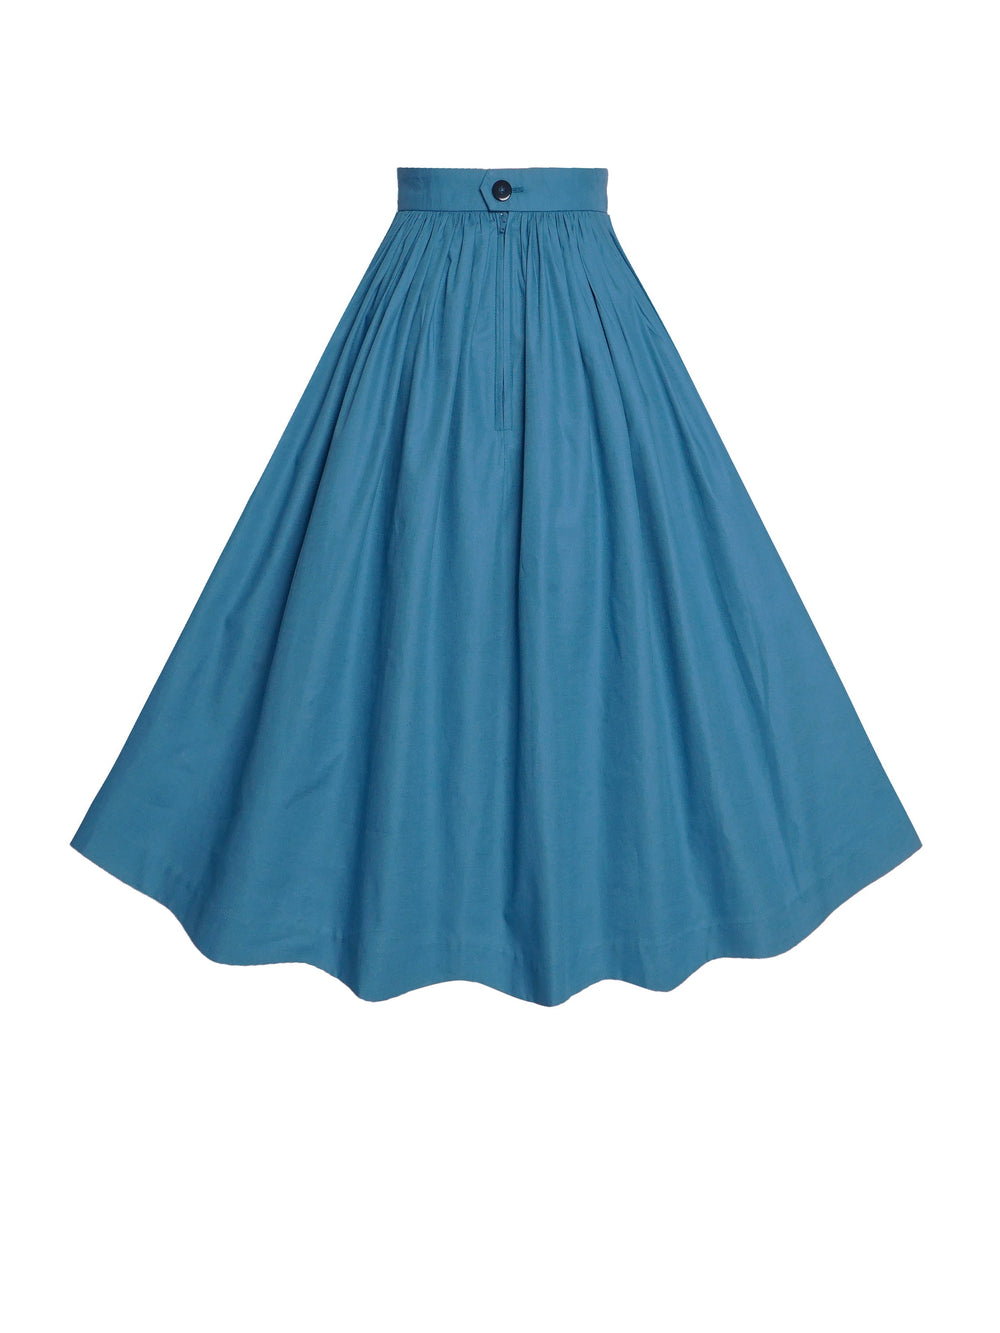 RTS - Size S - Lola Skirt in Air Force Blue Cotton